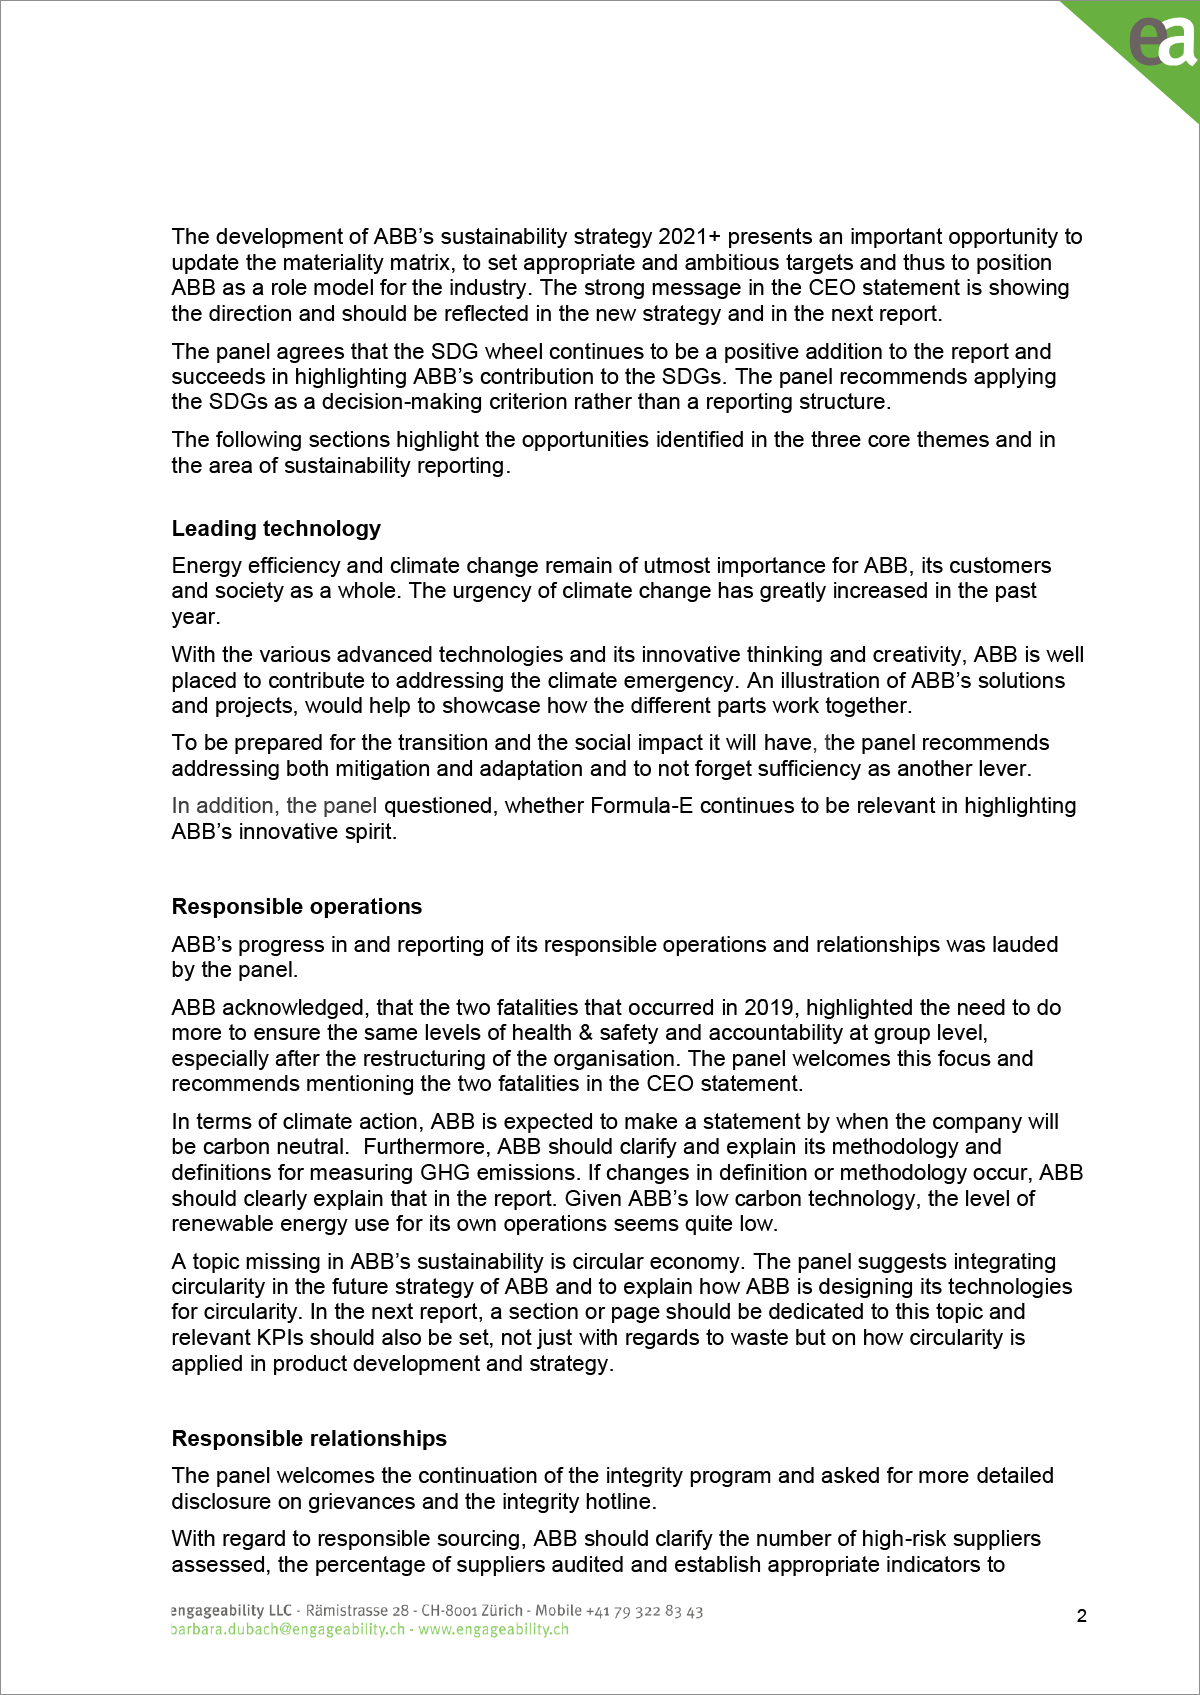 ABB Stakeholder Panel statement – page 2 of 3 (document)